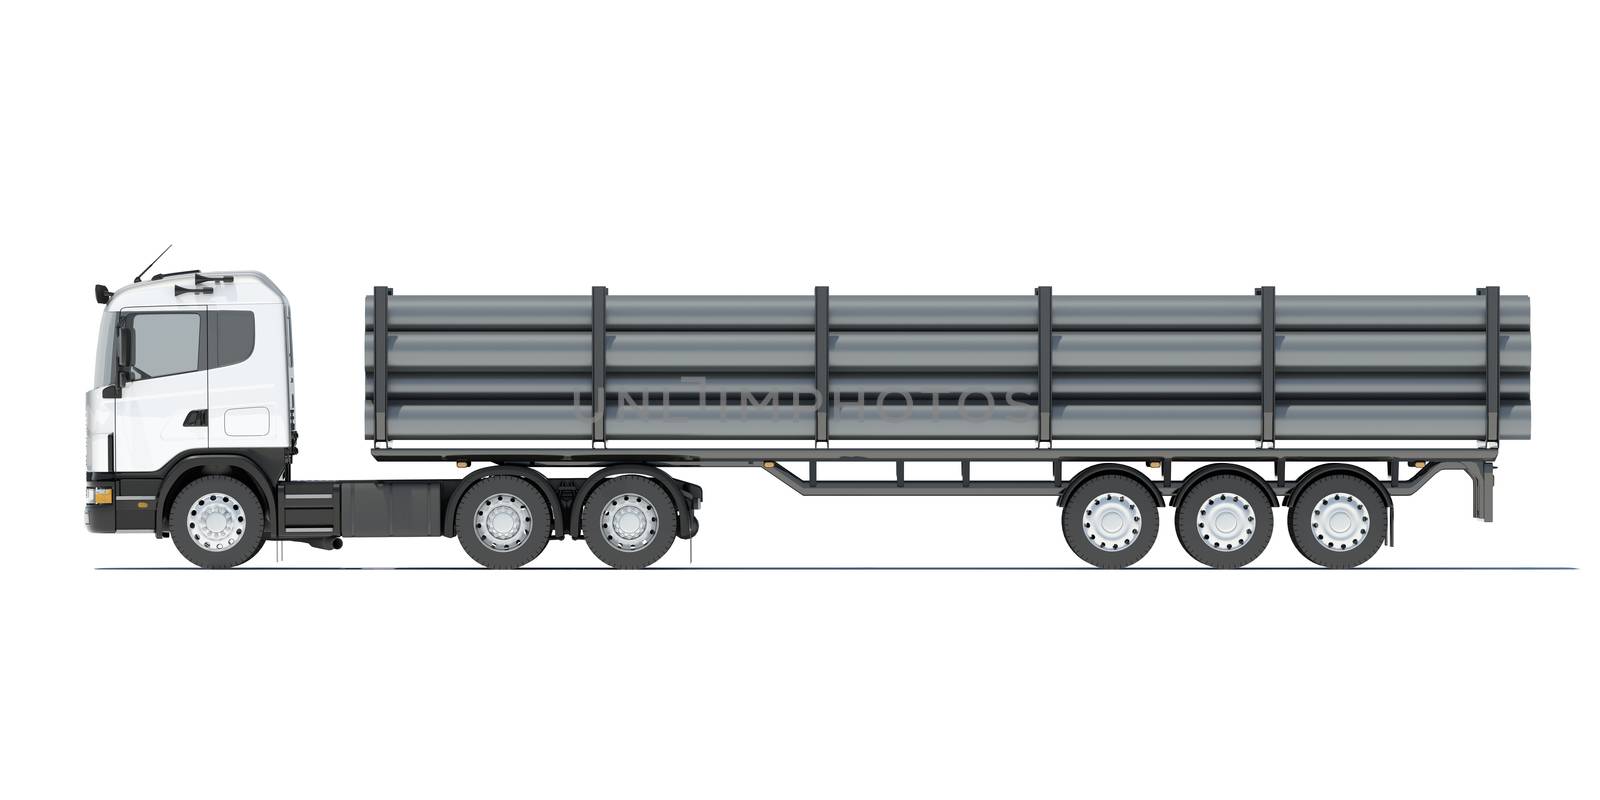 Truck transporting pipe. Front view. Isolated render on a white background